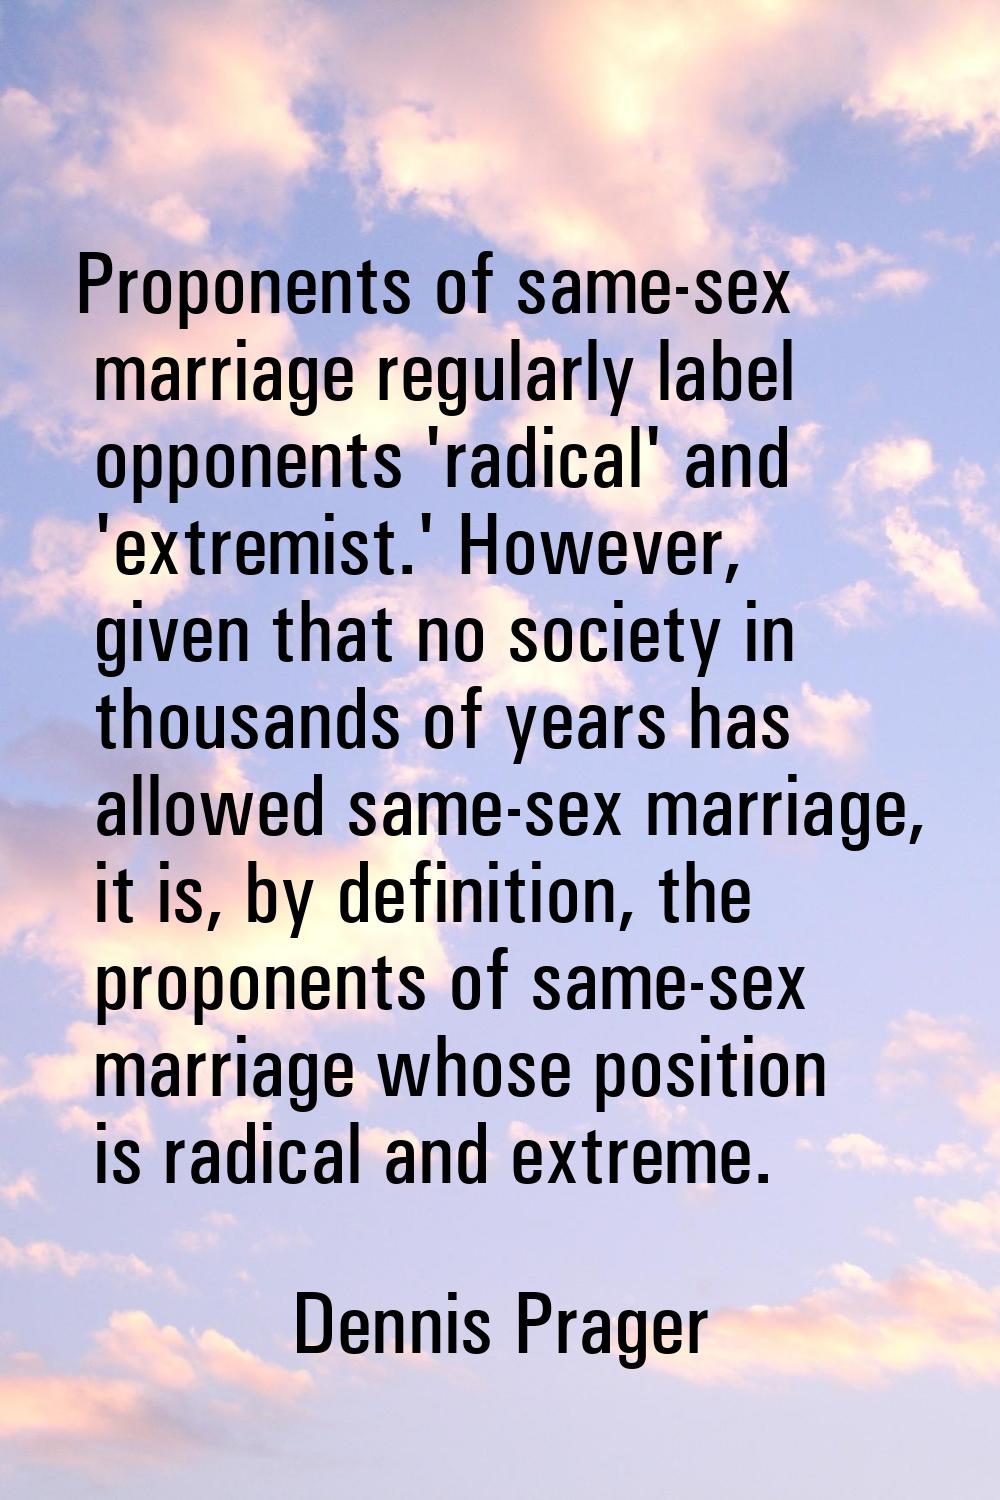 Proponents of same-sex marriage regularly label opponents 'radical' and 'extremist.' However, given